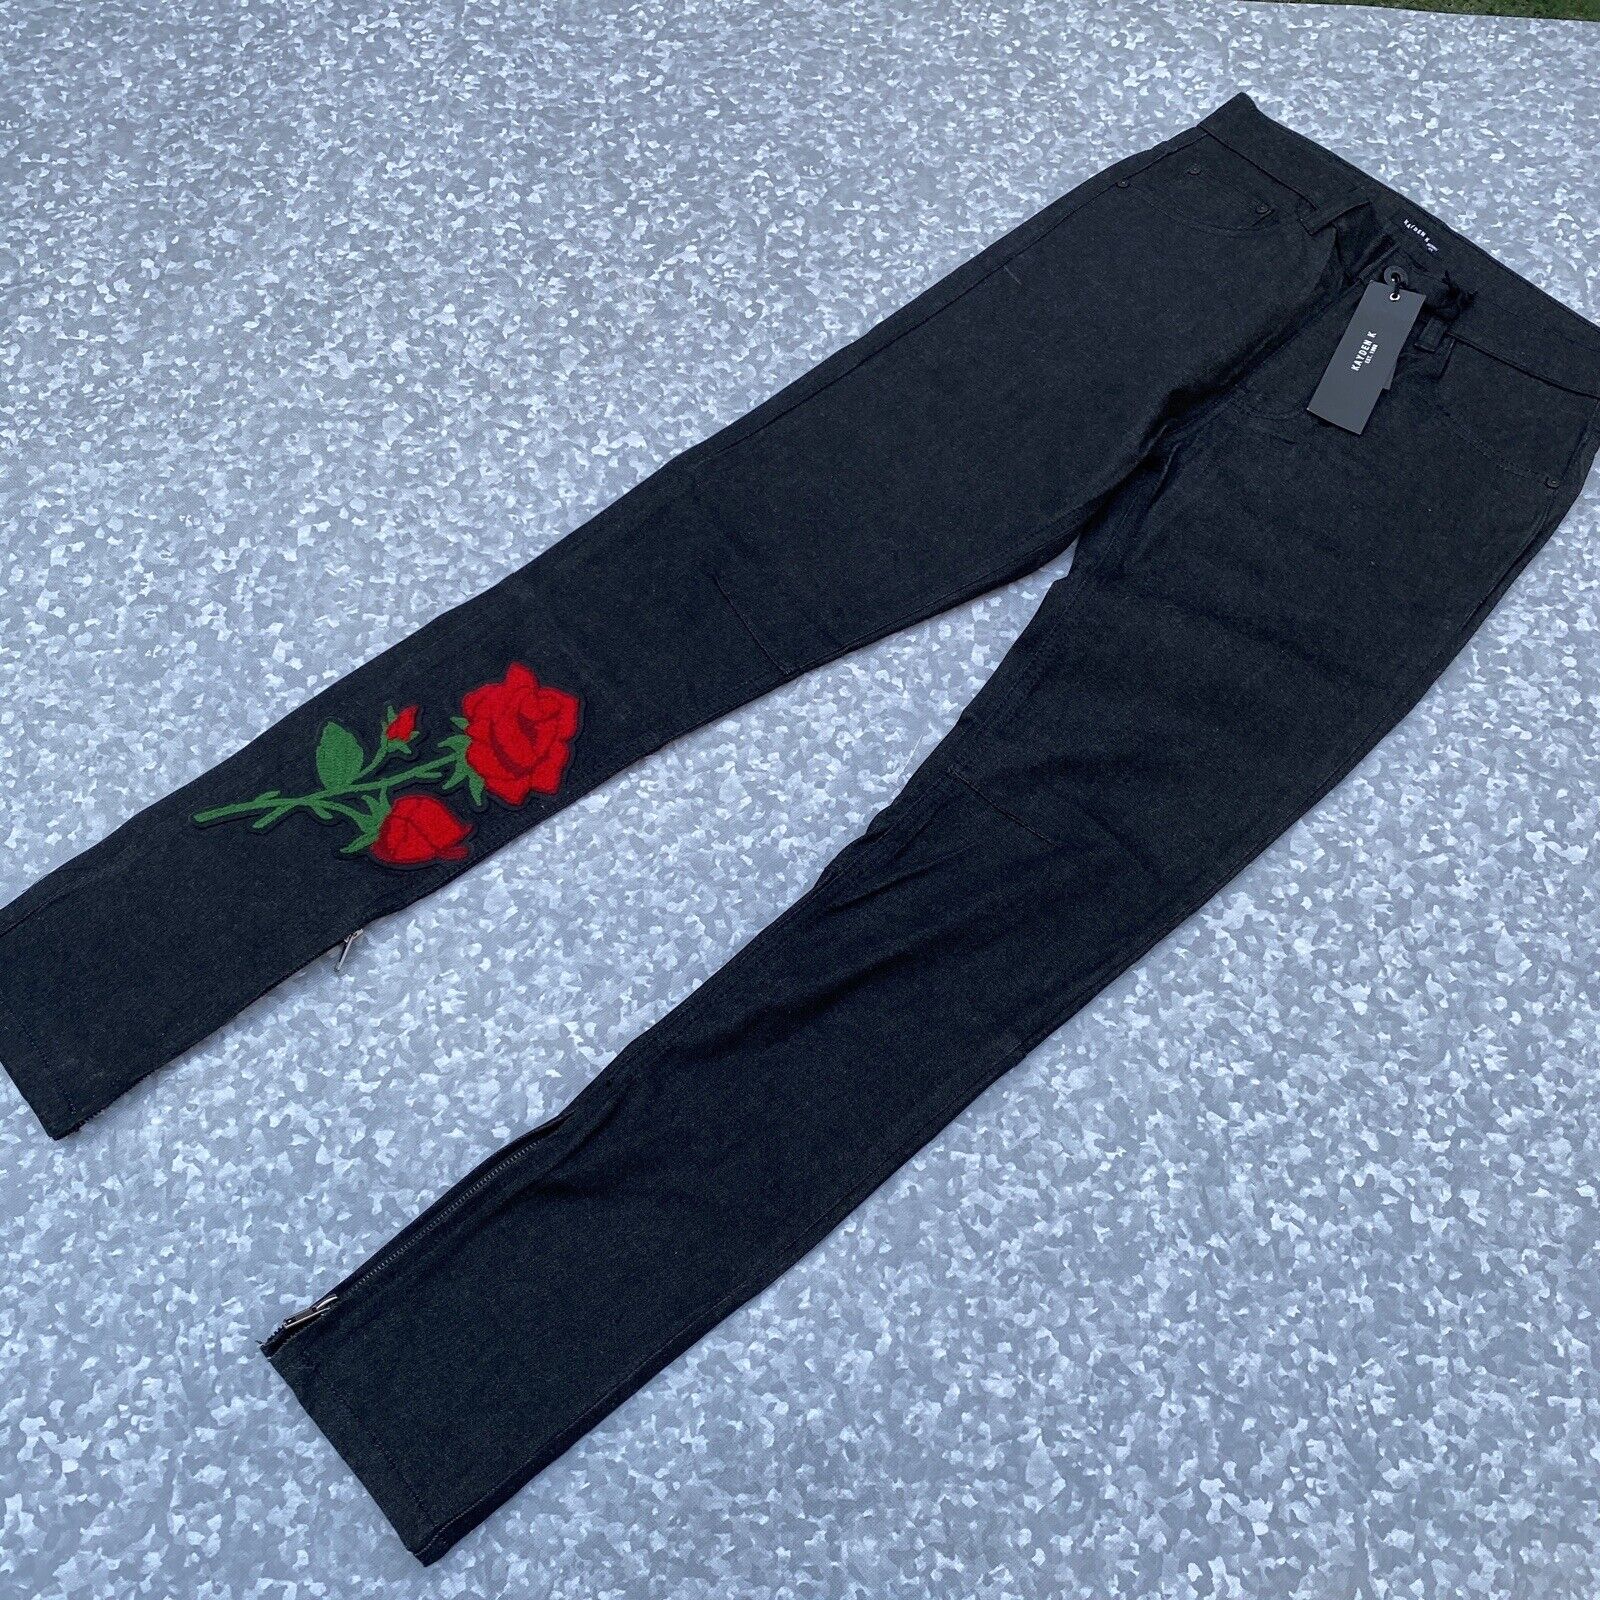 Kayden K Jeans Size 30 Raw Black SKINNY Jeans Rose Patched New